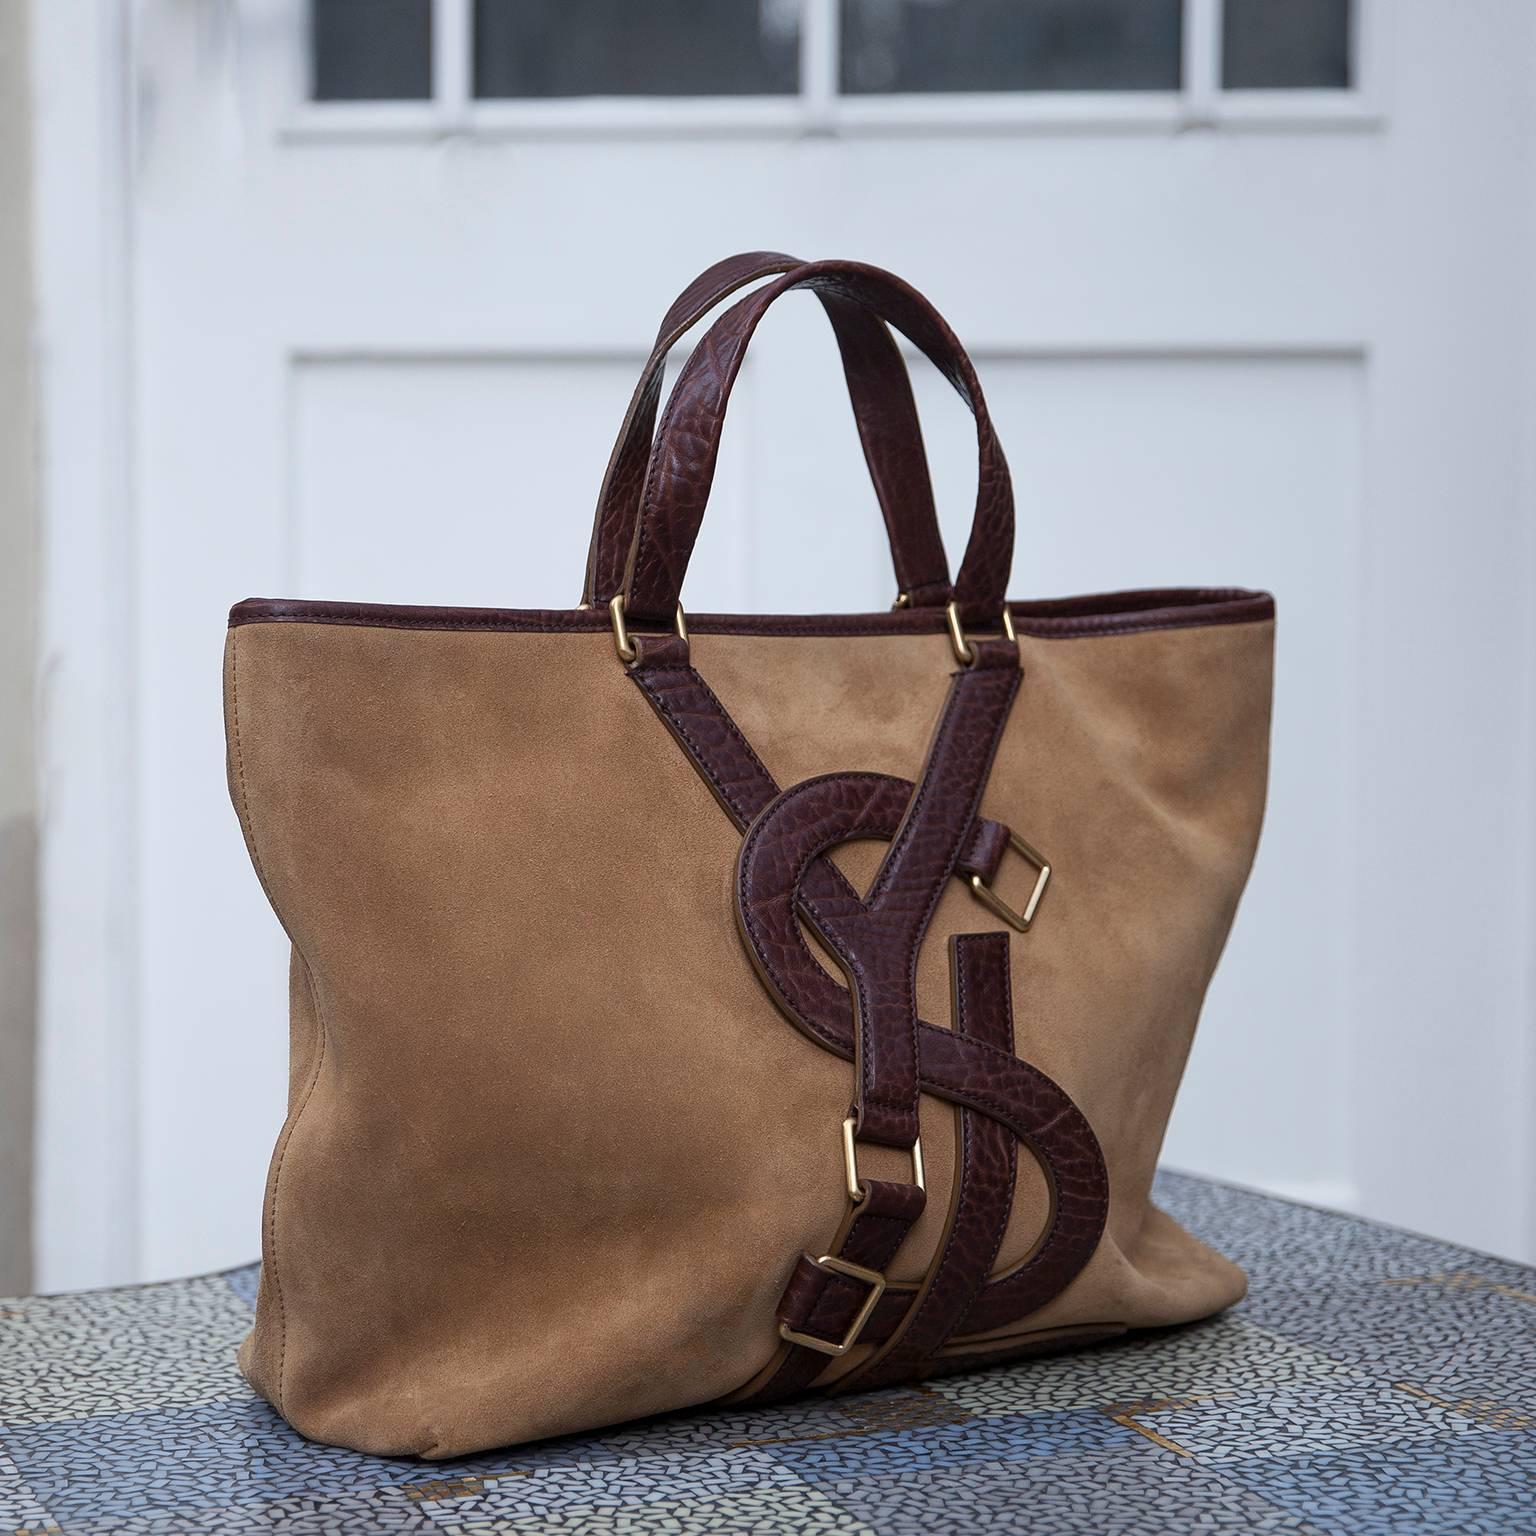 Wonderful weekender shopper by Yves Saint Laurent in suede leather and YSL logo in brown leather, fantastic vintage condition.
Measures: H 49 x B 16 x D 49 cm.